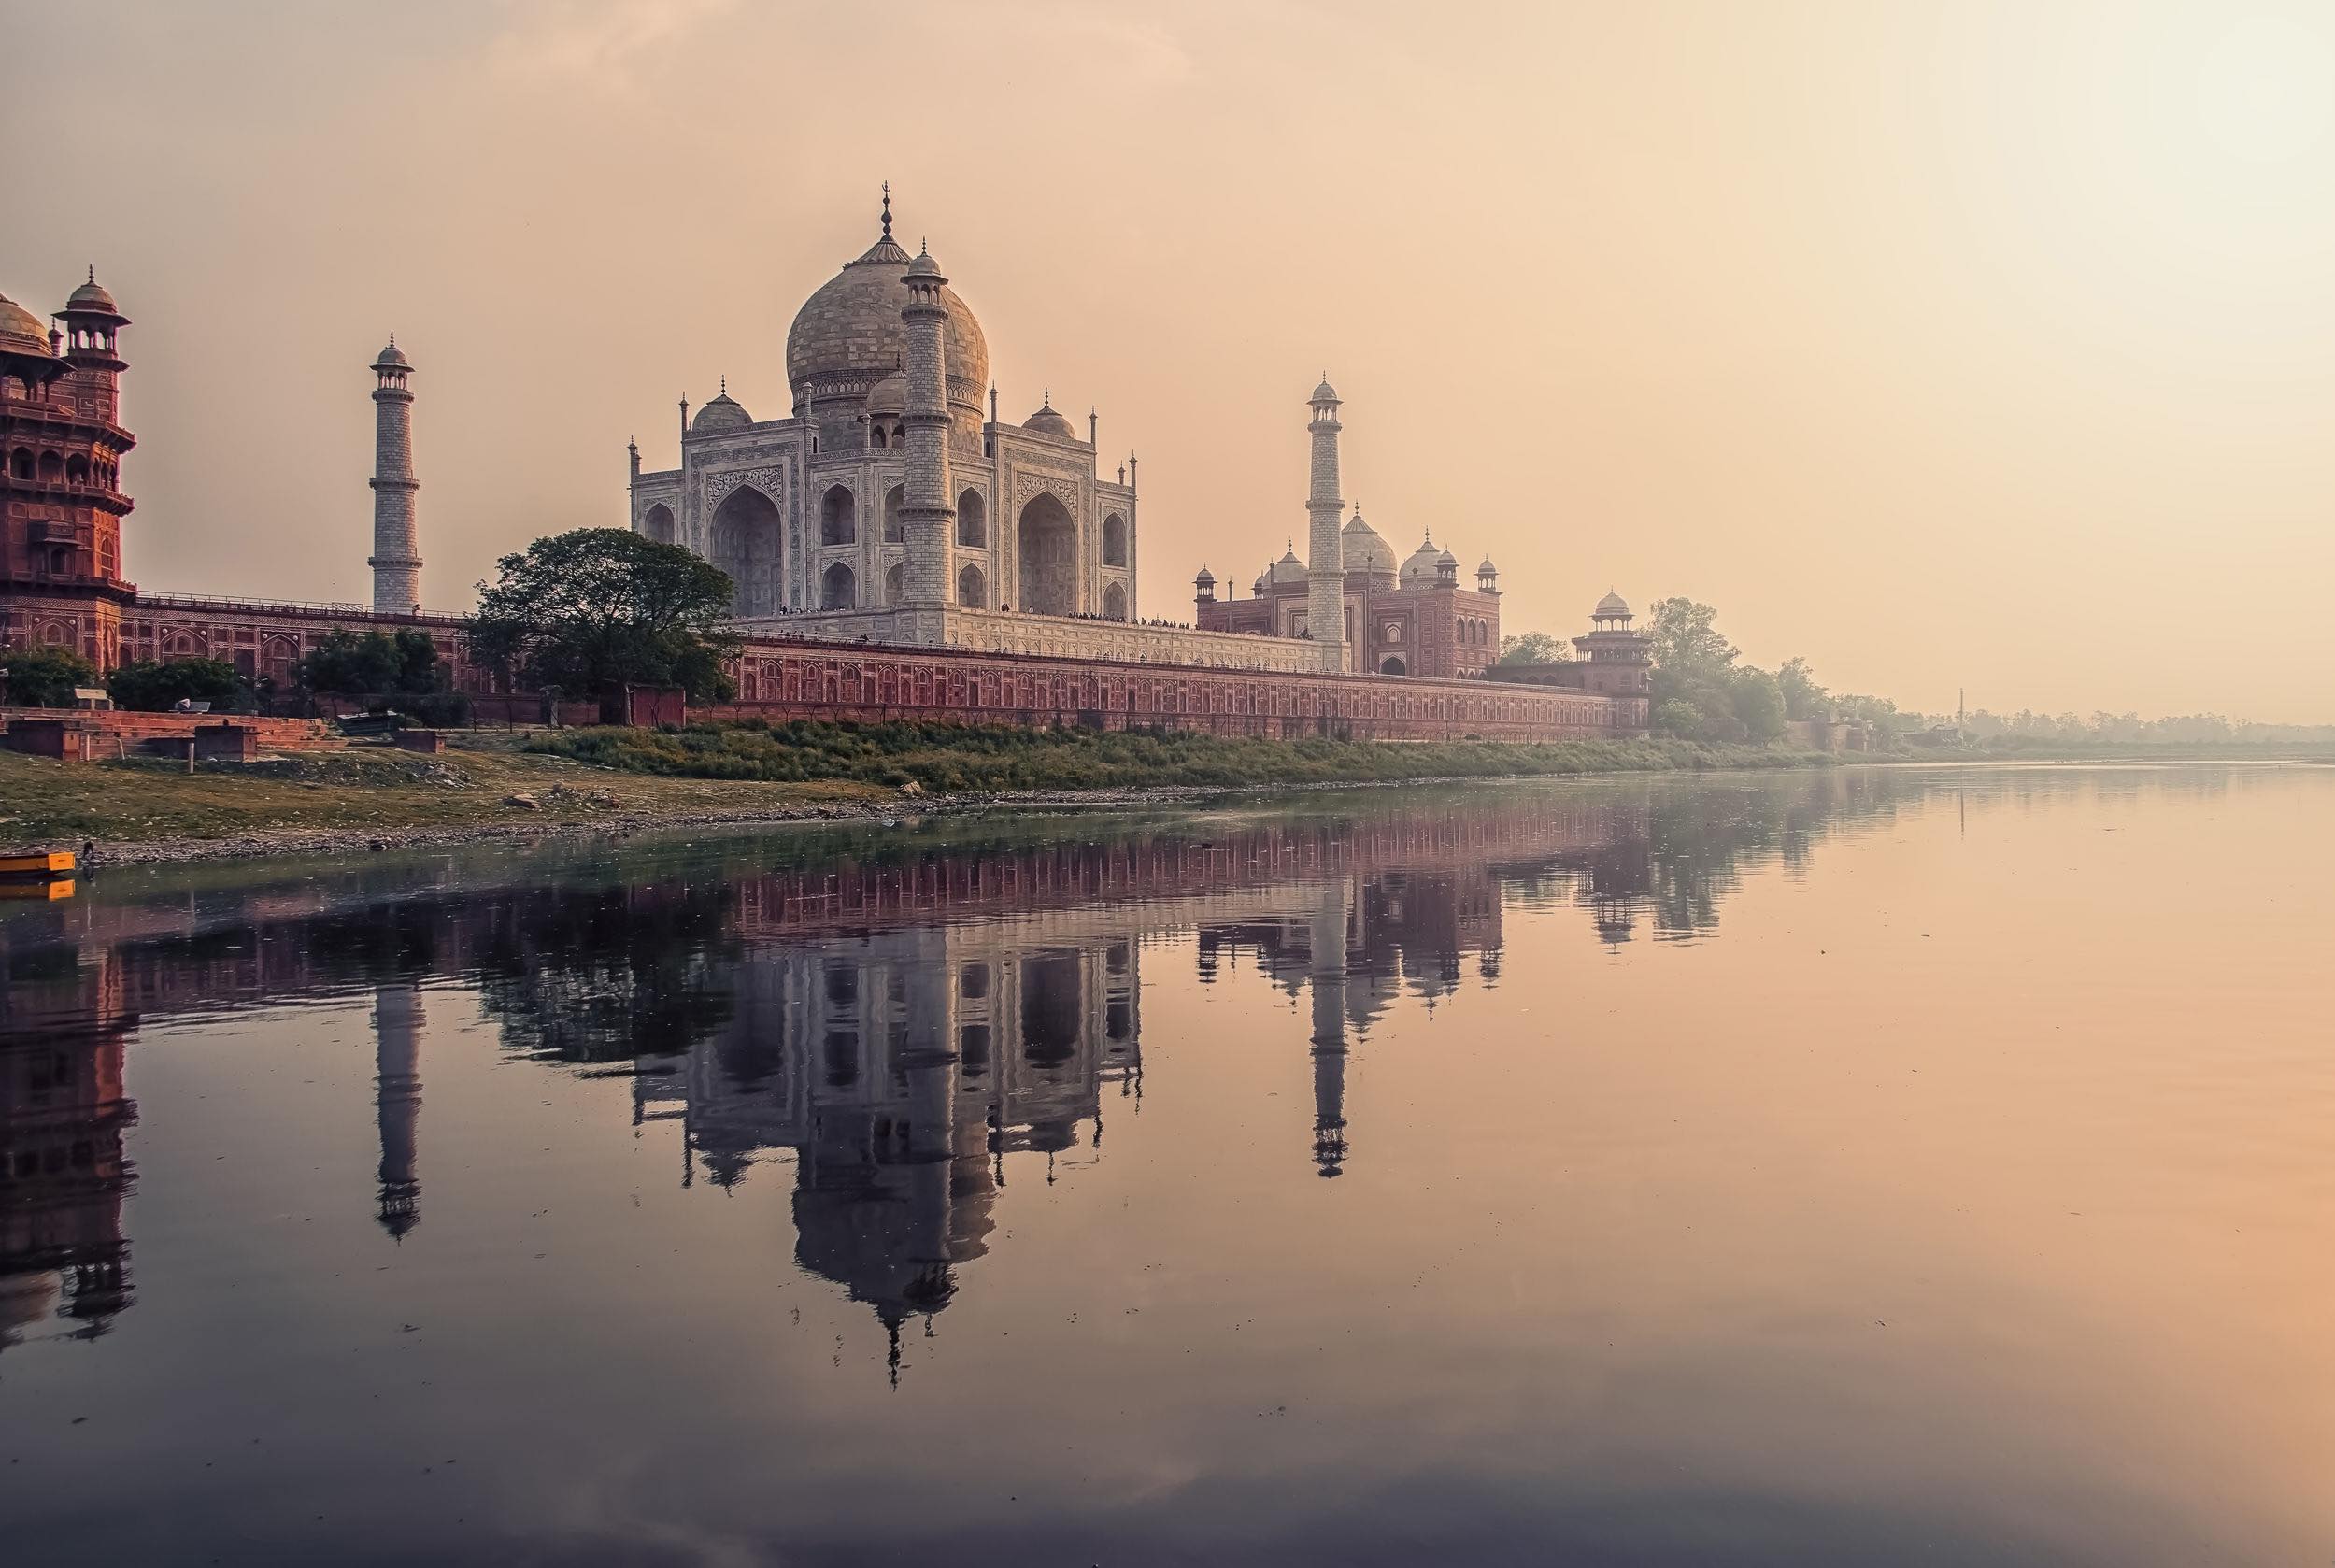 India Is Open For Travel Again, With Free Visitor Visas Too!